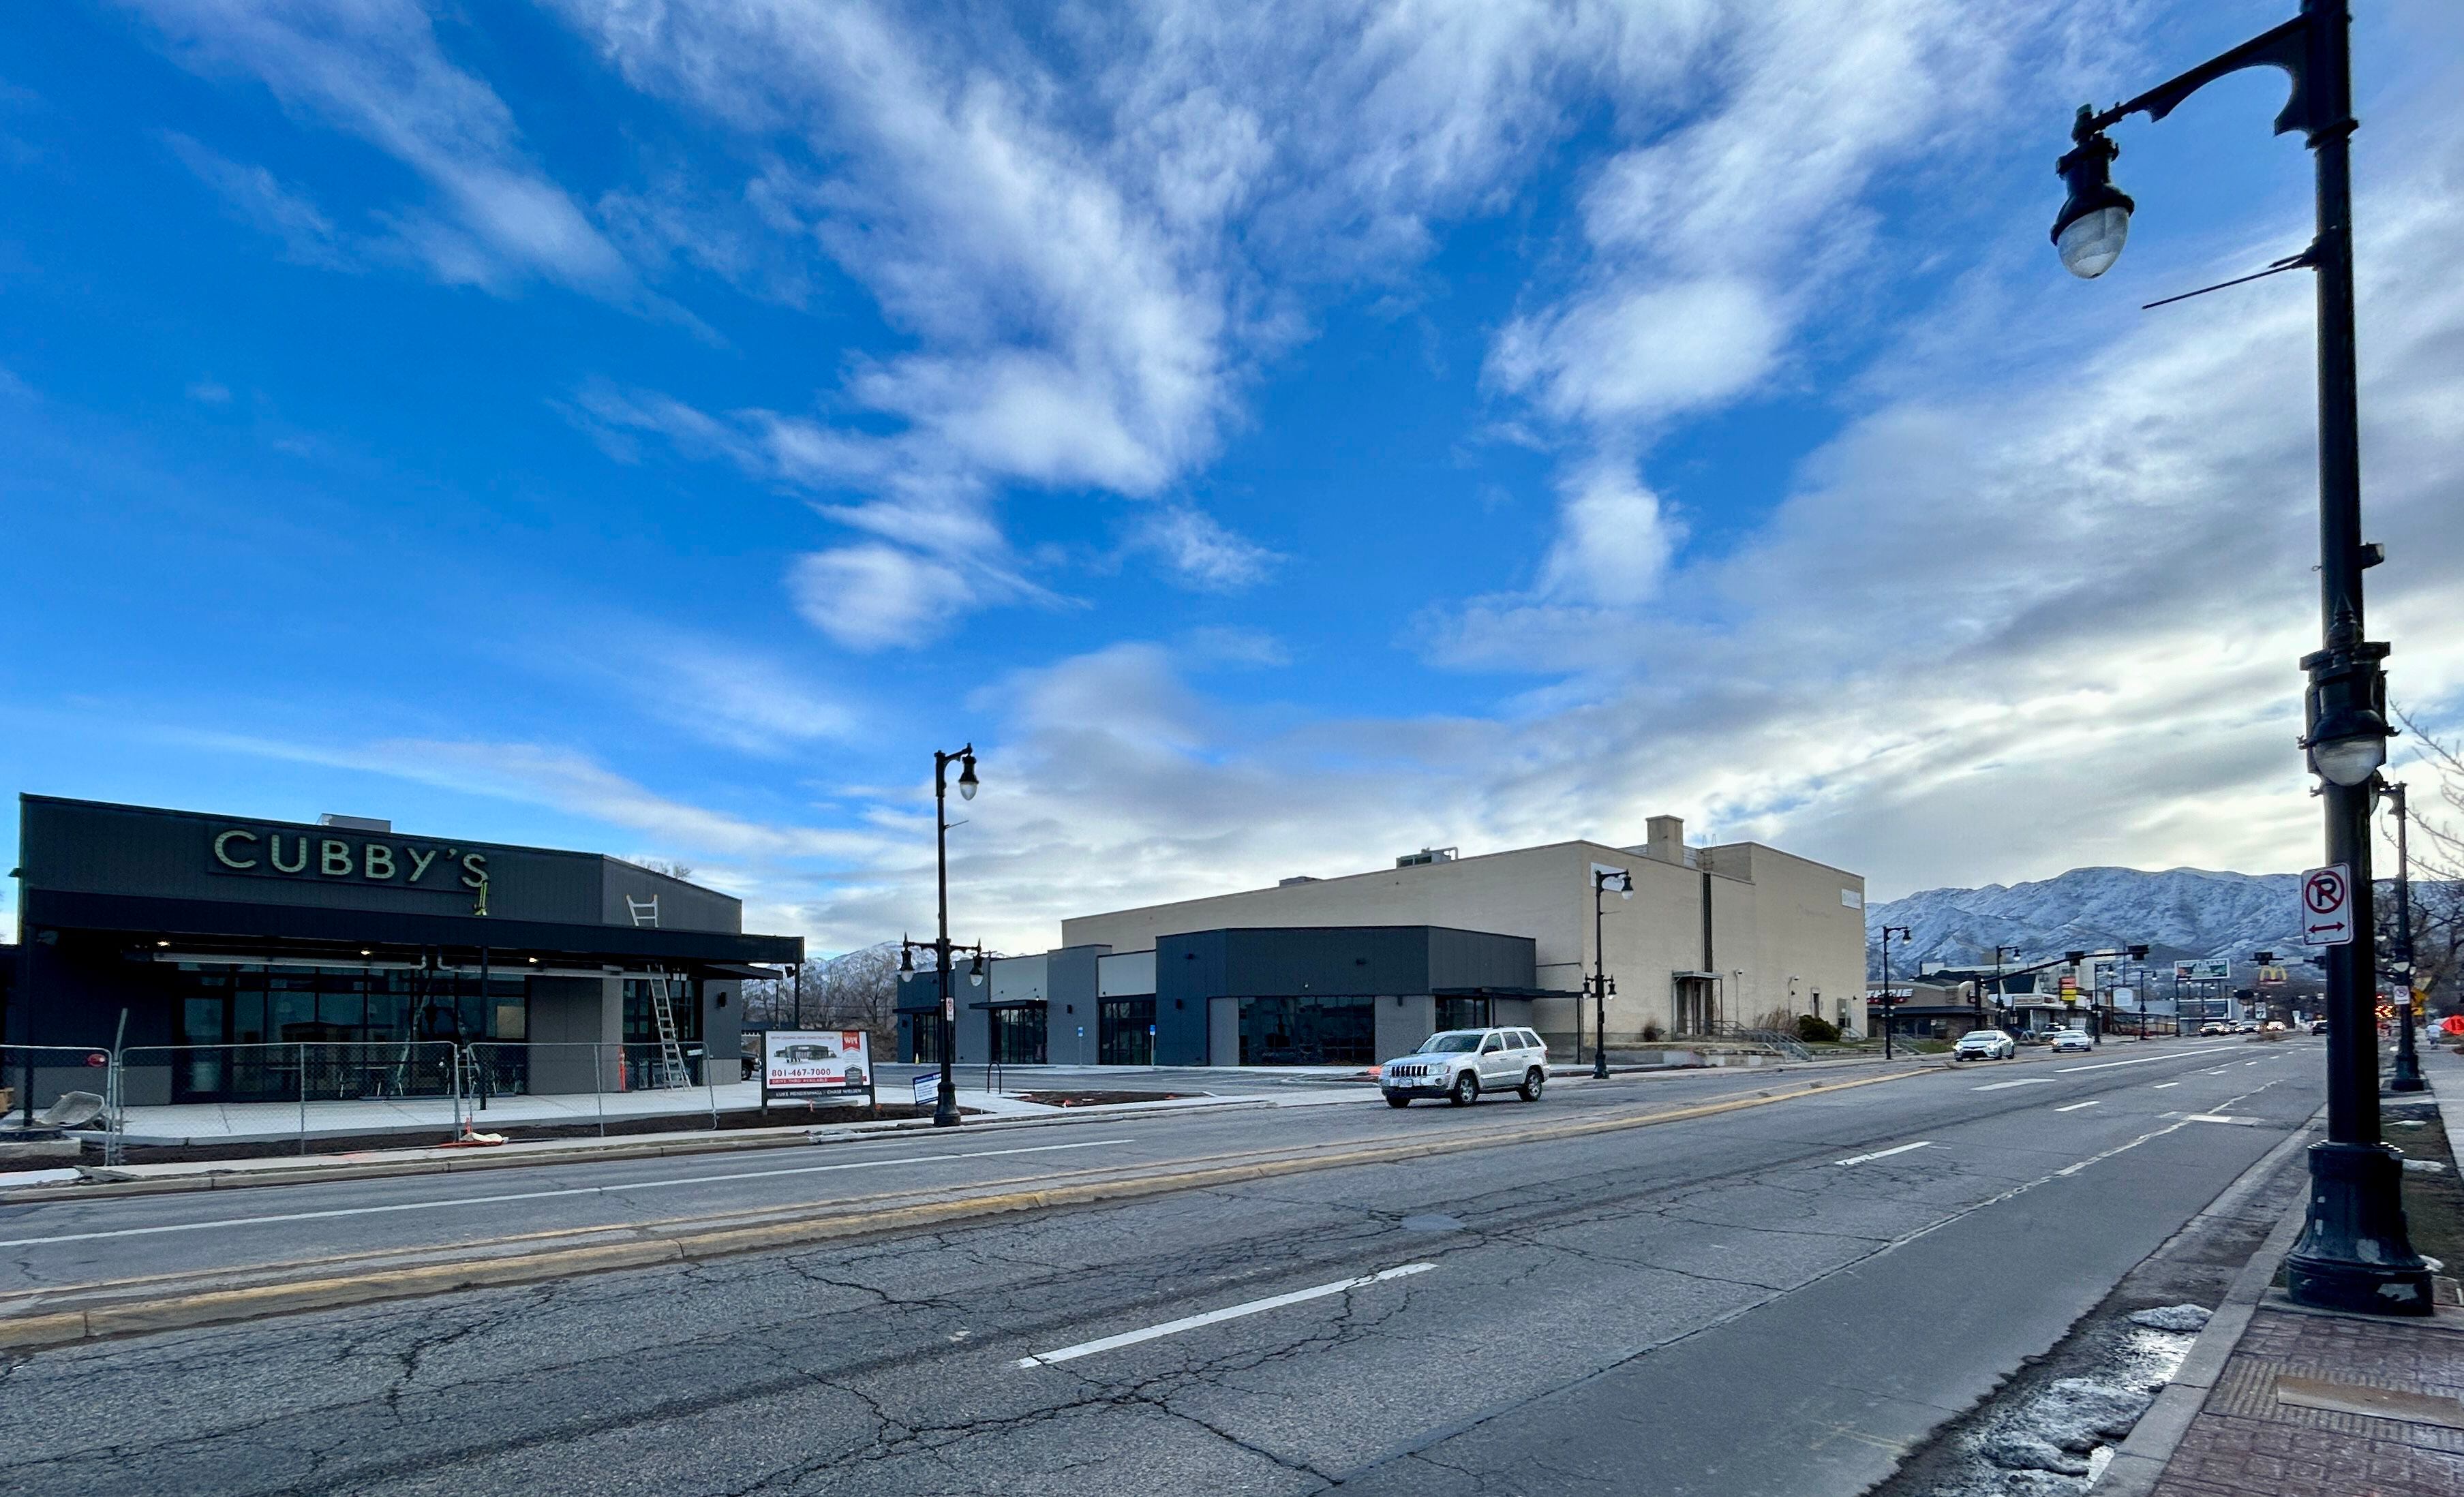 (Sheila R. McCann | The Salt Lake Tribune) A new Cubby's location is expected to open later this month in Sugar House, with a drive-thru on its west side.